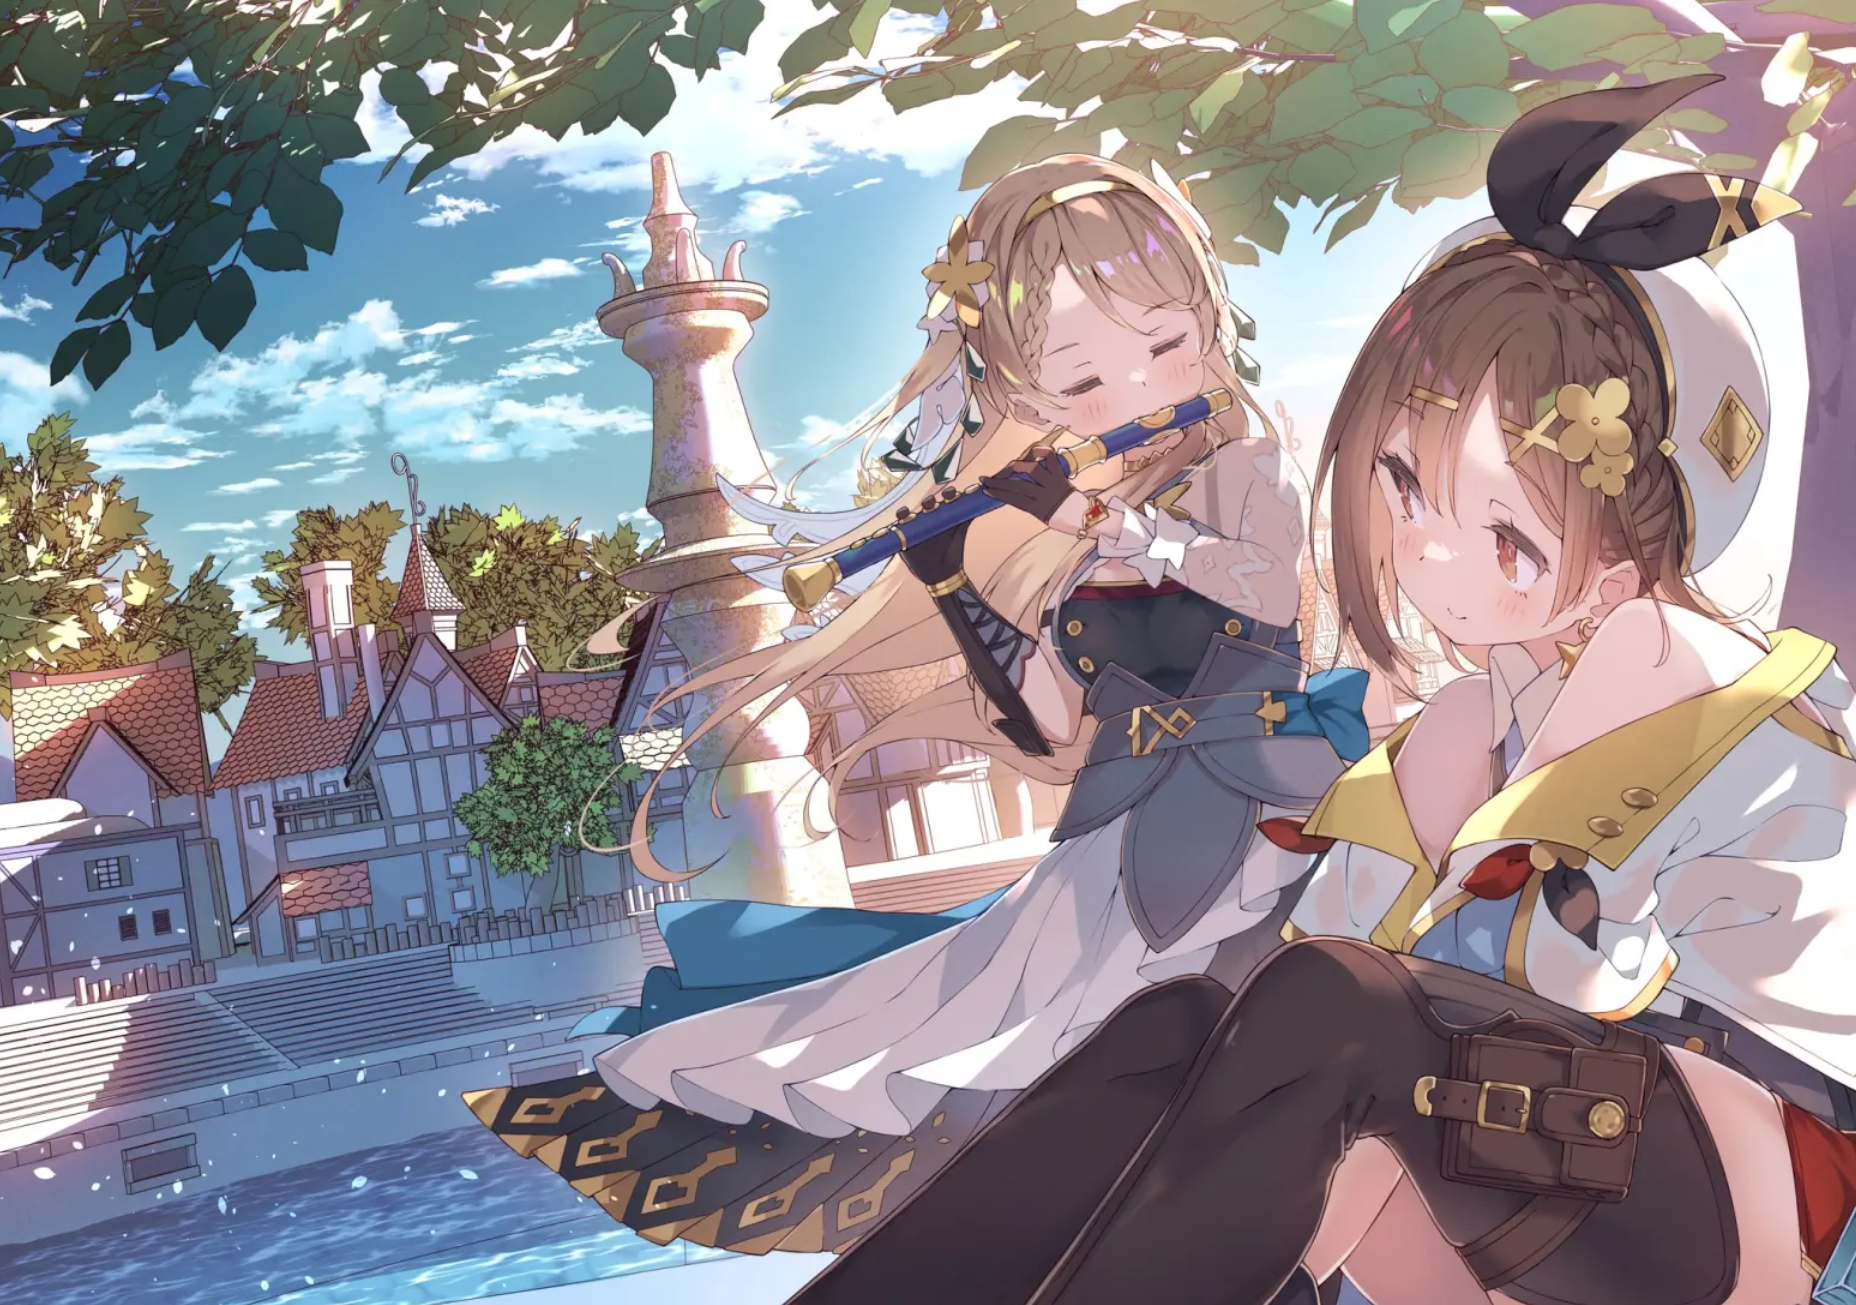 Anime 1856x1305 Atelier Ryza anime anime girls flute leaves water brunette braids smiling gloves clouds sky village